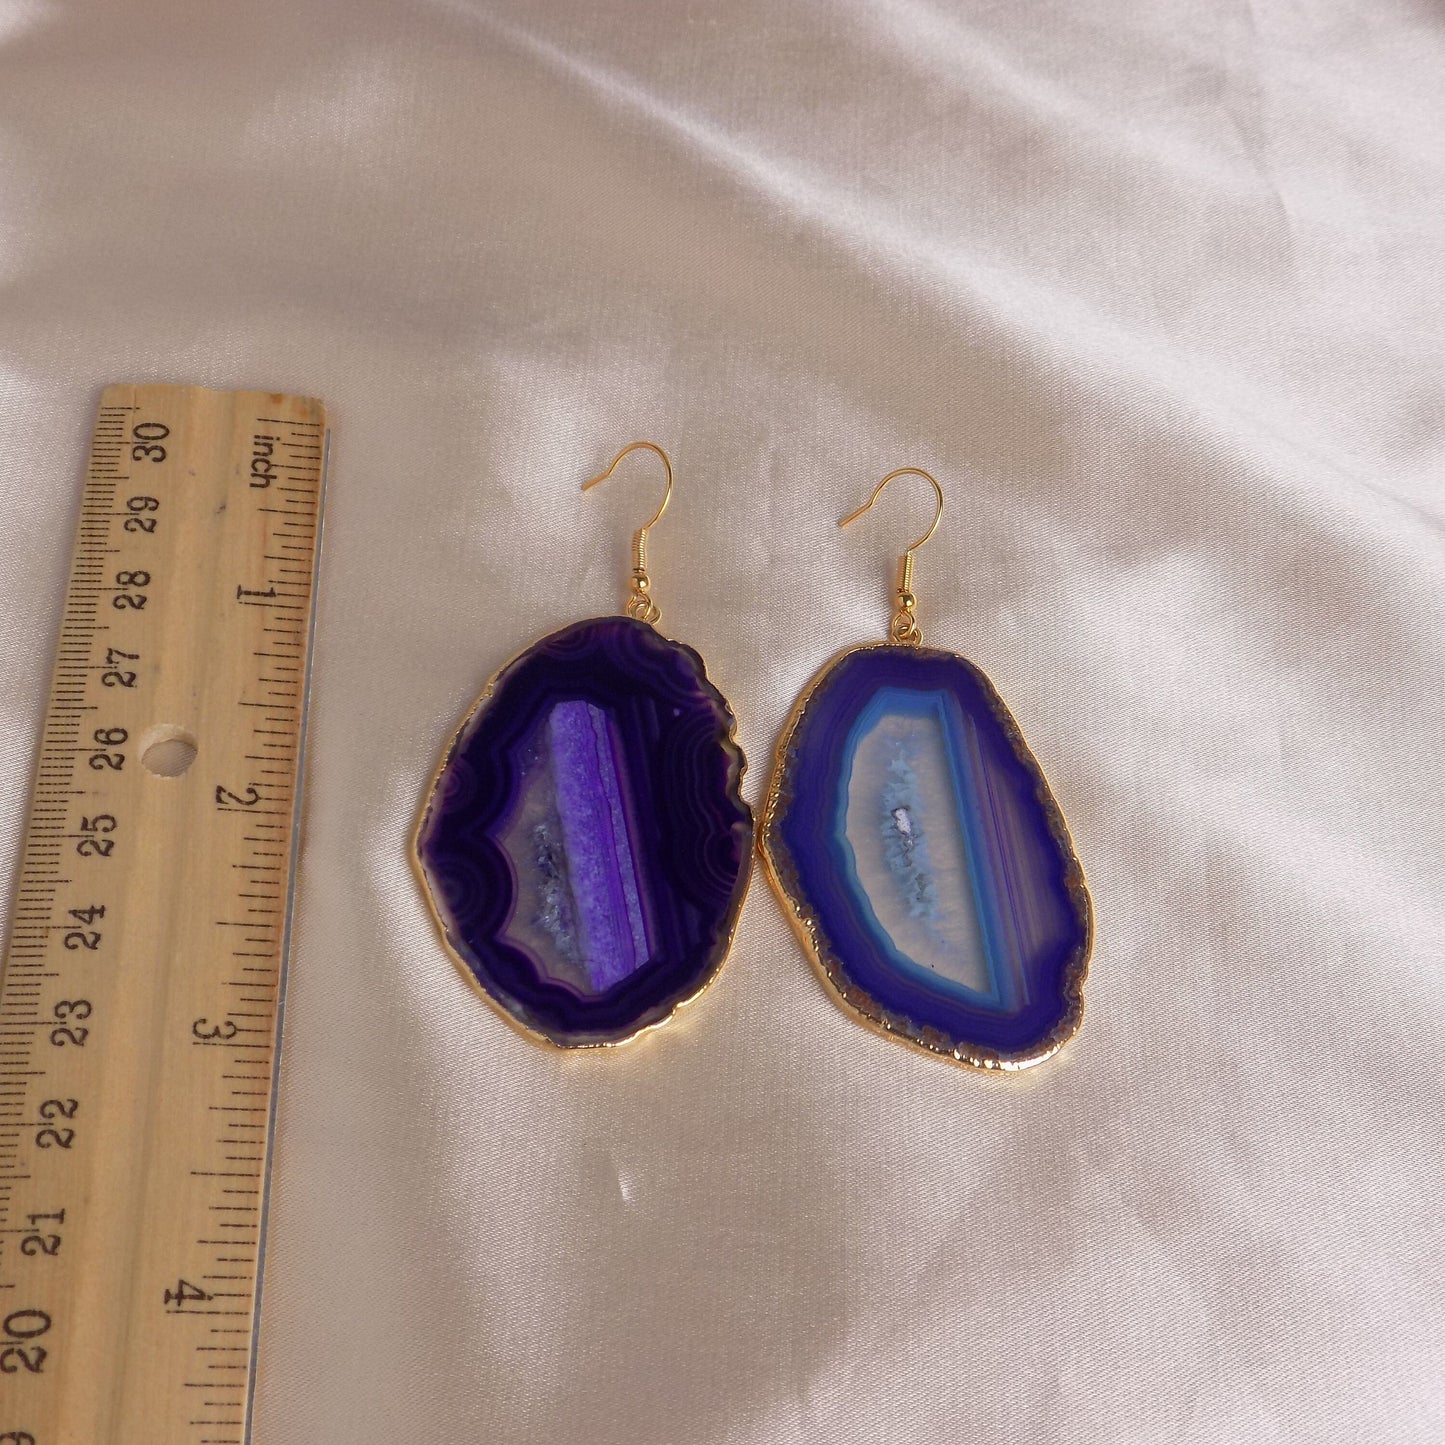 Unique Purple Agate Earrings Gold - Large Sliced Geode Dangle - Christmas Gift For Her - G15-228